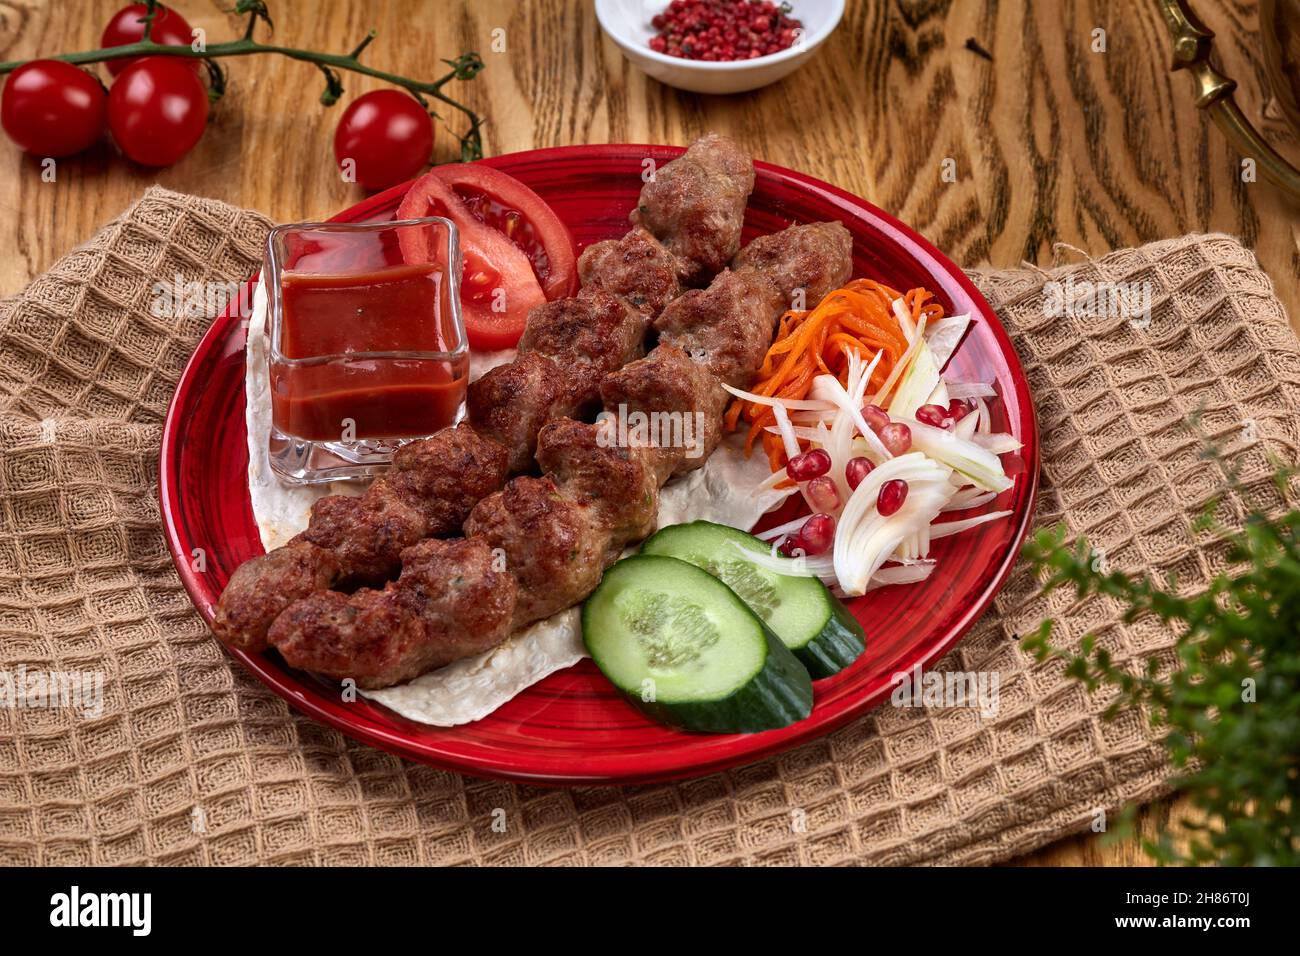 Tasty lula kebab on the plate on a wooden table. Chopped meat on wooden skewers, grilled. Eastern cuisine. Stock Photo